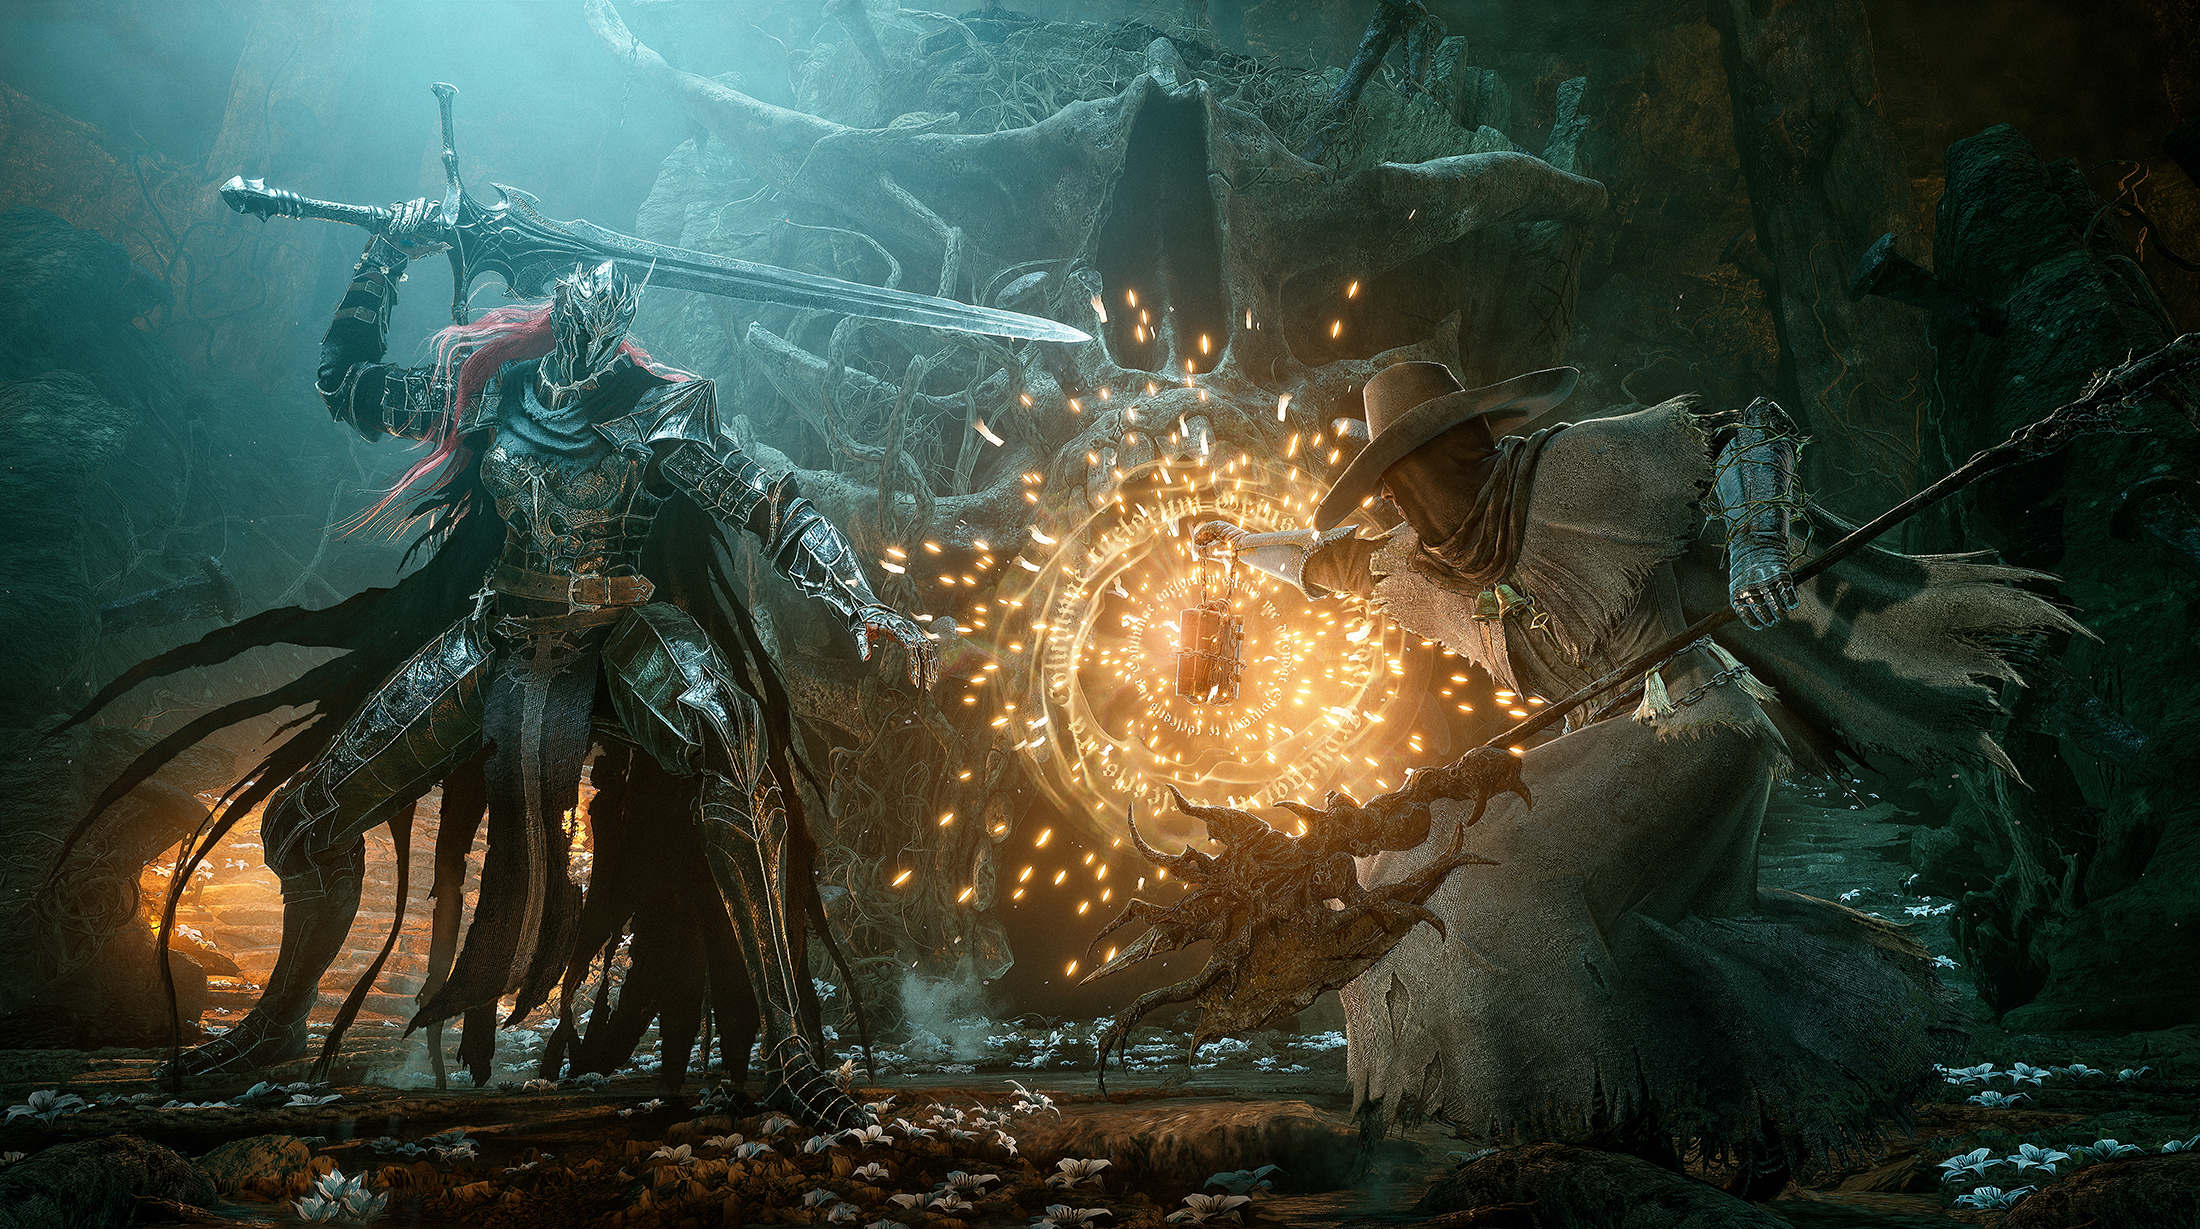 LORDS OF THE FALLEN - 'Dual Worlds' Official Gameplay Showcase 